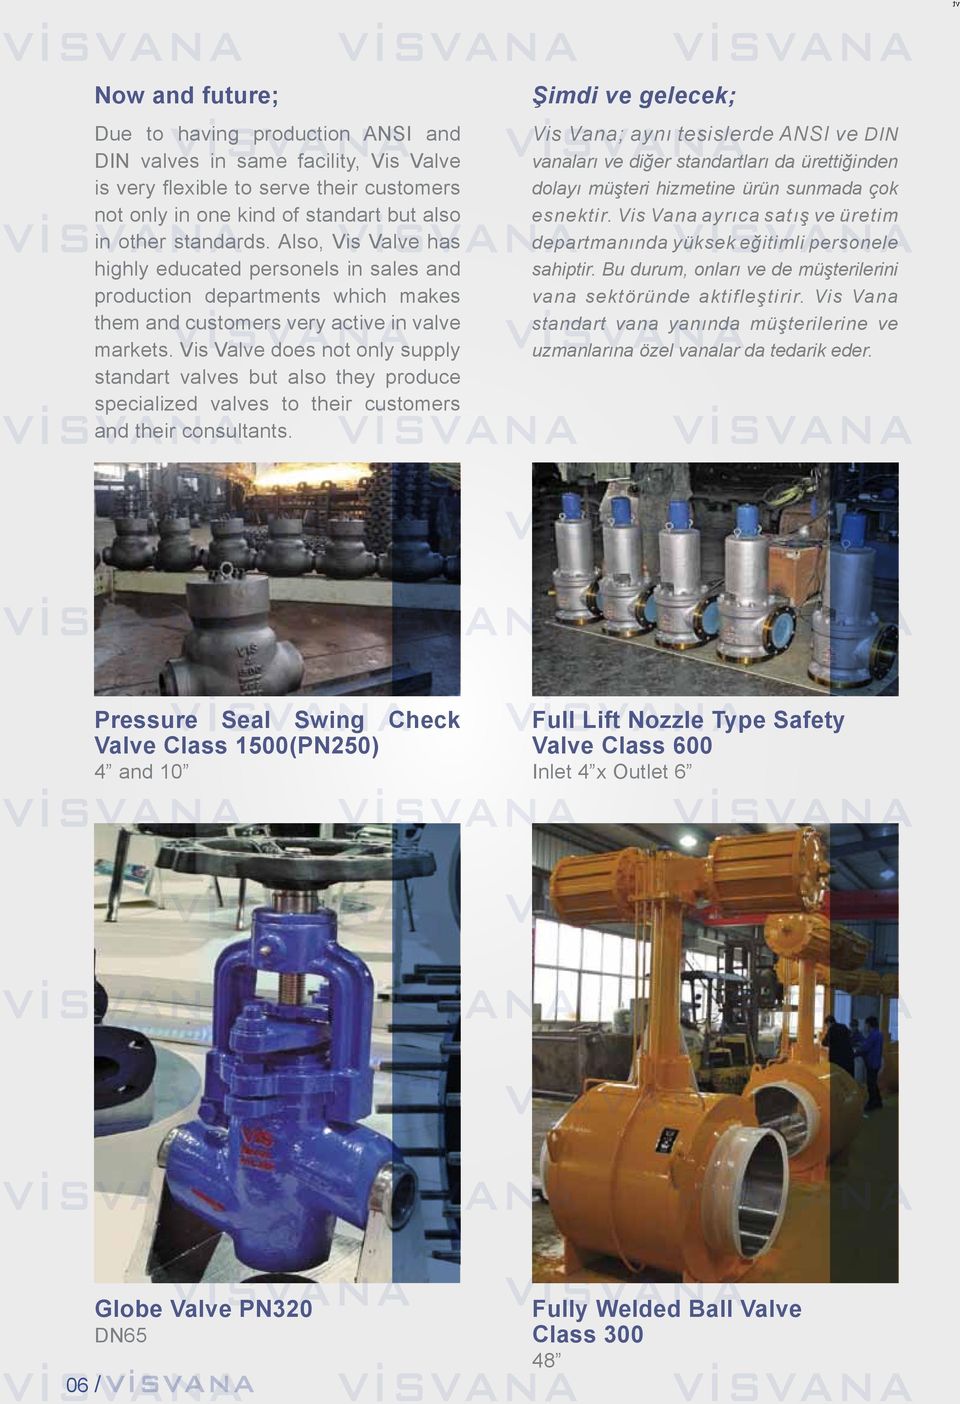 Vis Valve does not only supply standart valves but also they produce specialized valves to their customers and their consultants.